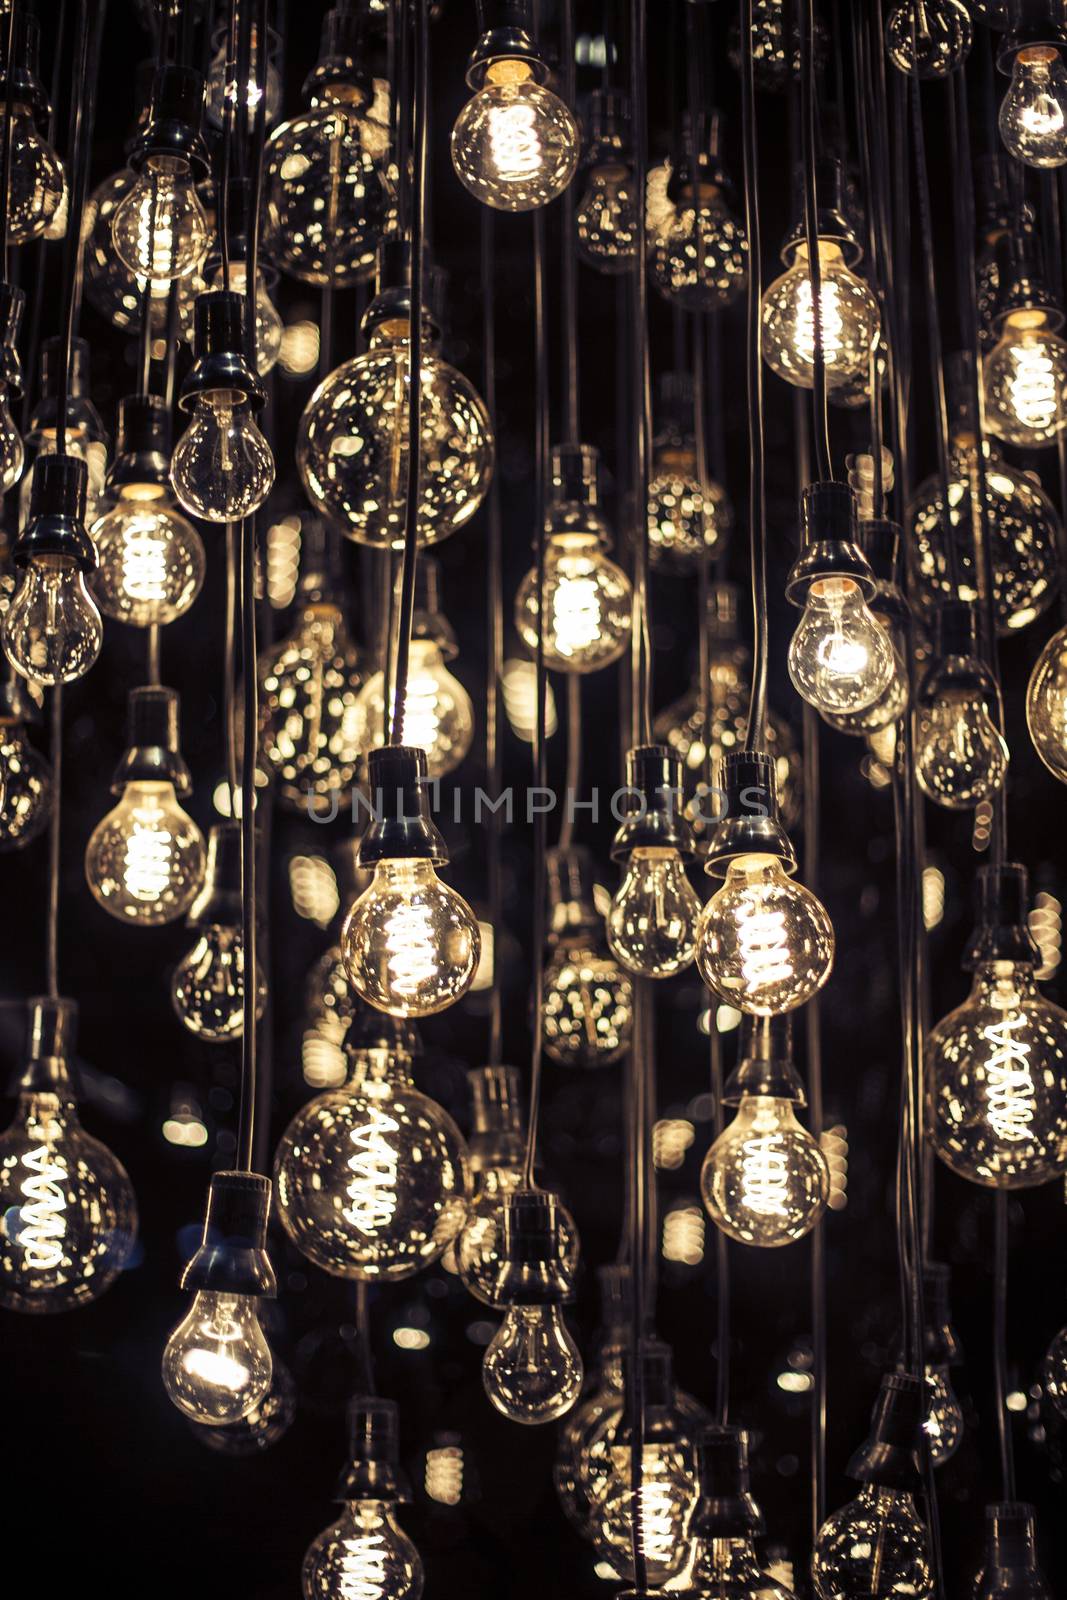 Group of hanging filament lamps on black background